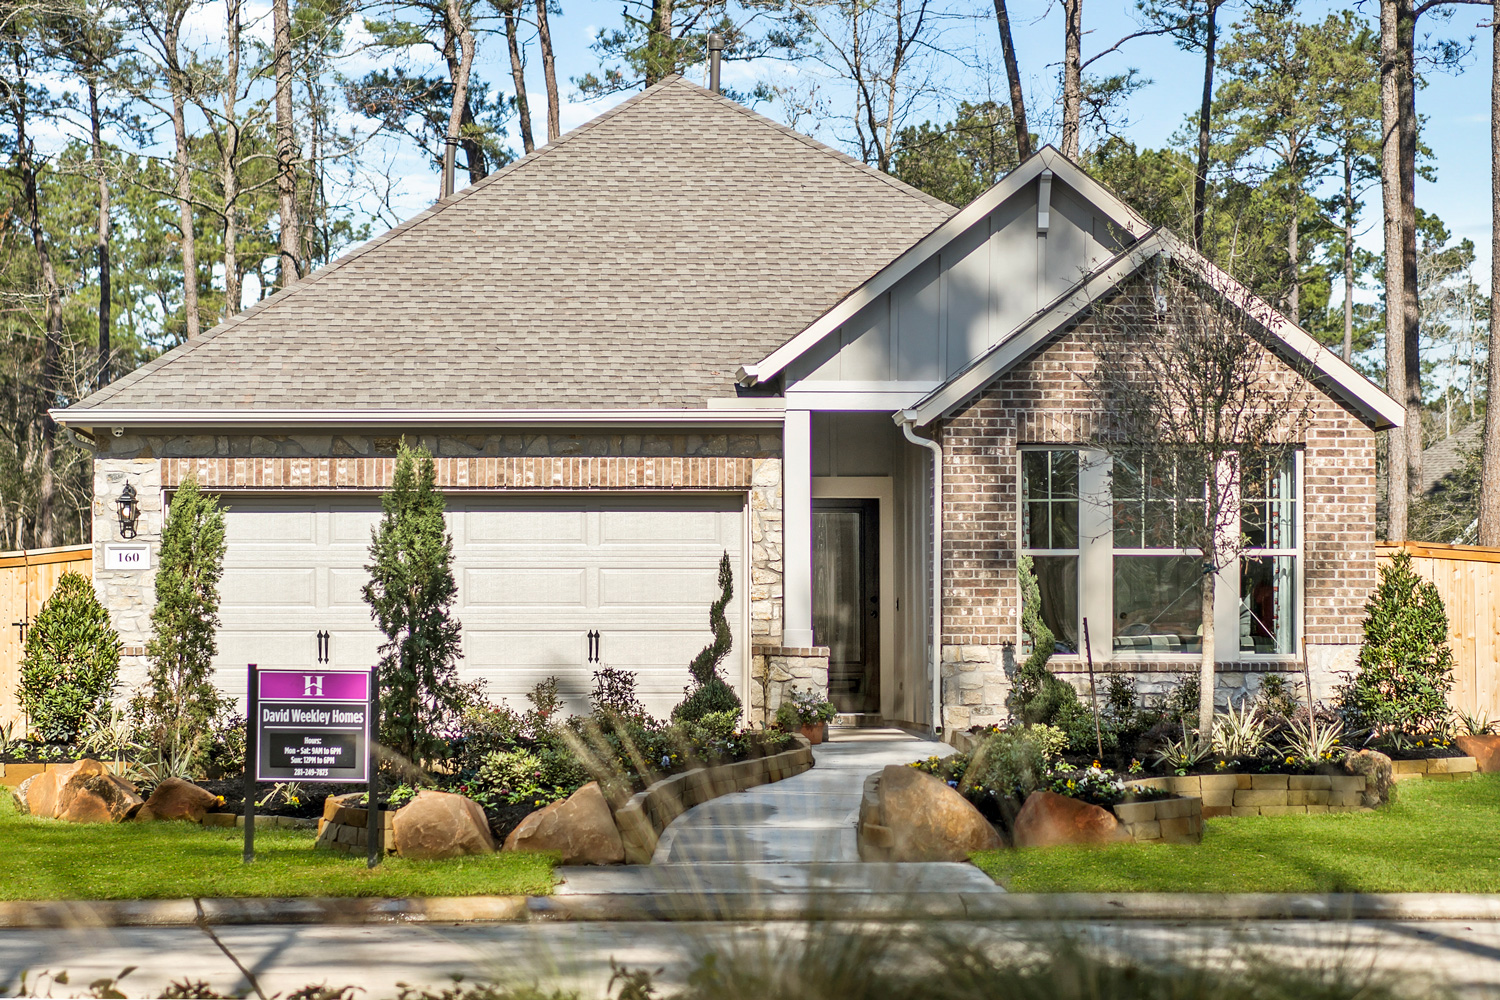 Builder Spotlight: David Weekley Homes is Building Dreams and Enhancing Lives with New Homes in The Woodlands Hills